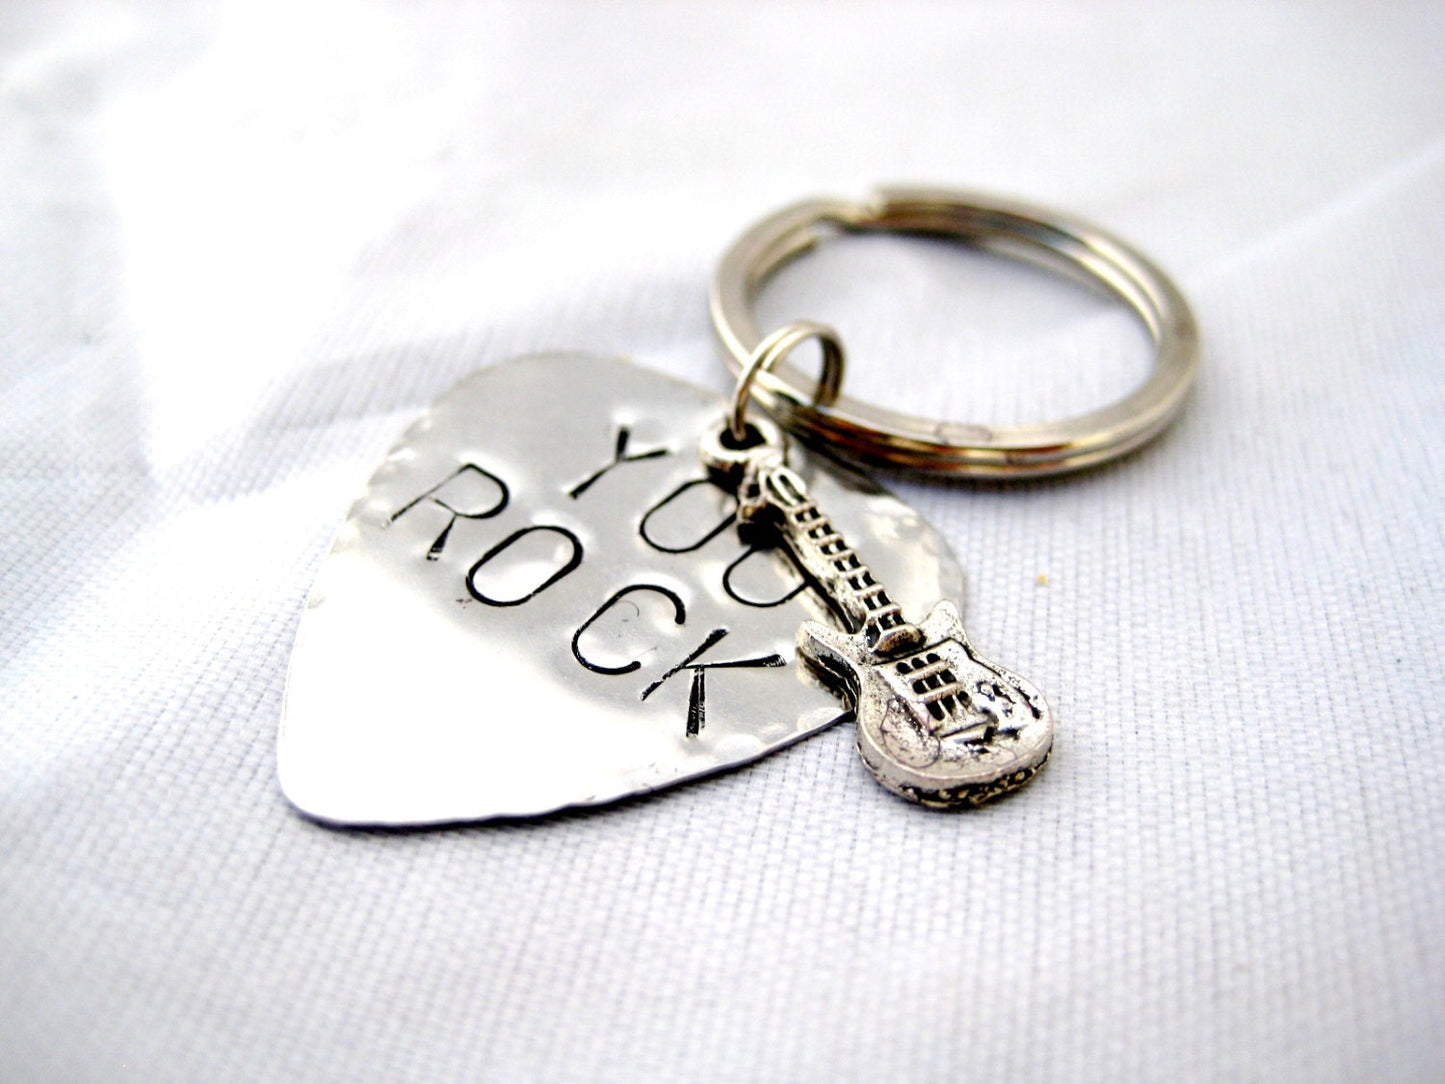 FATHER'S DAY GIFT Guitar Pick, Keychain with Guitar Charm, boyfriend gift, Father's Day Keychain, Music Gift for Him, Custom Keychain